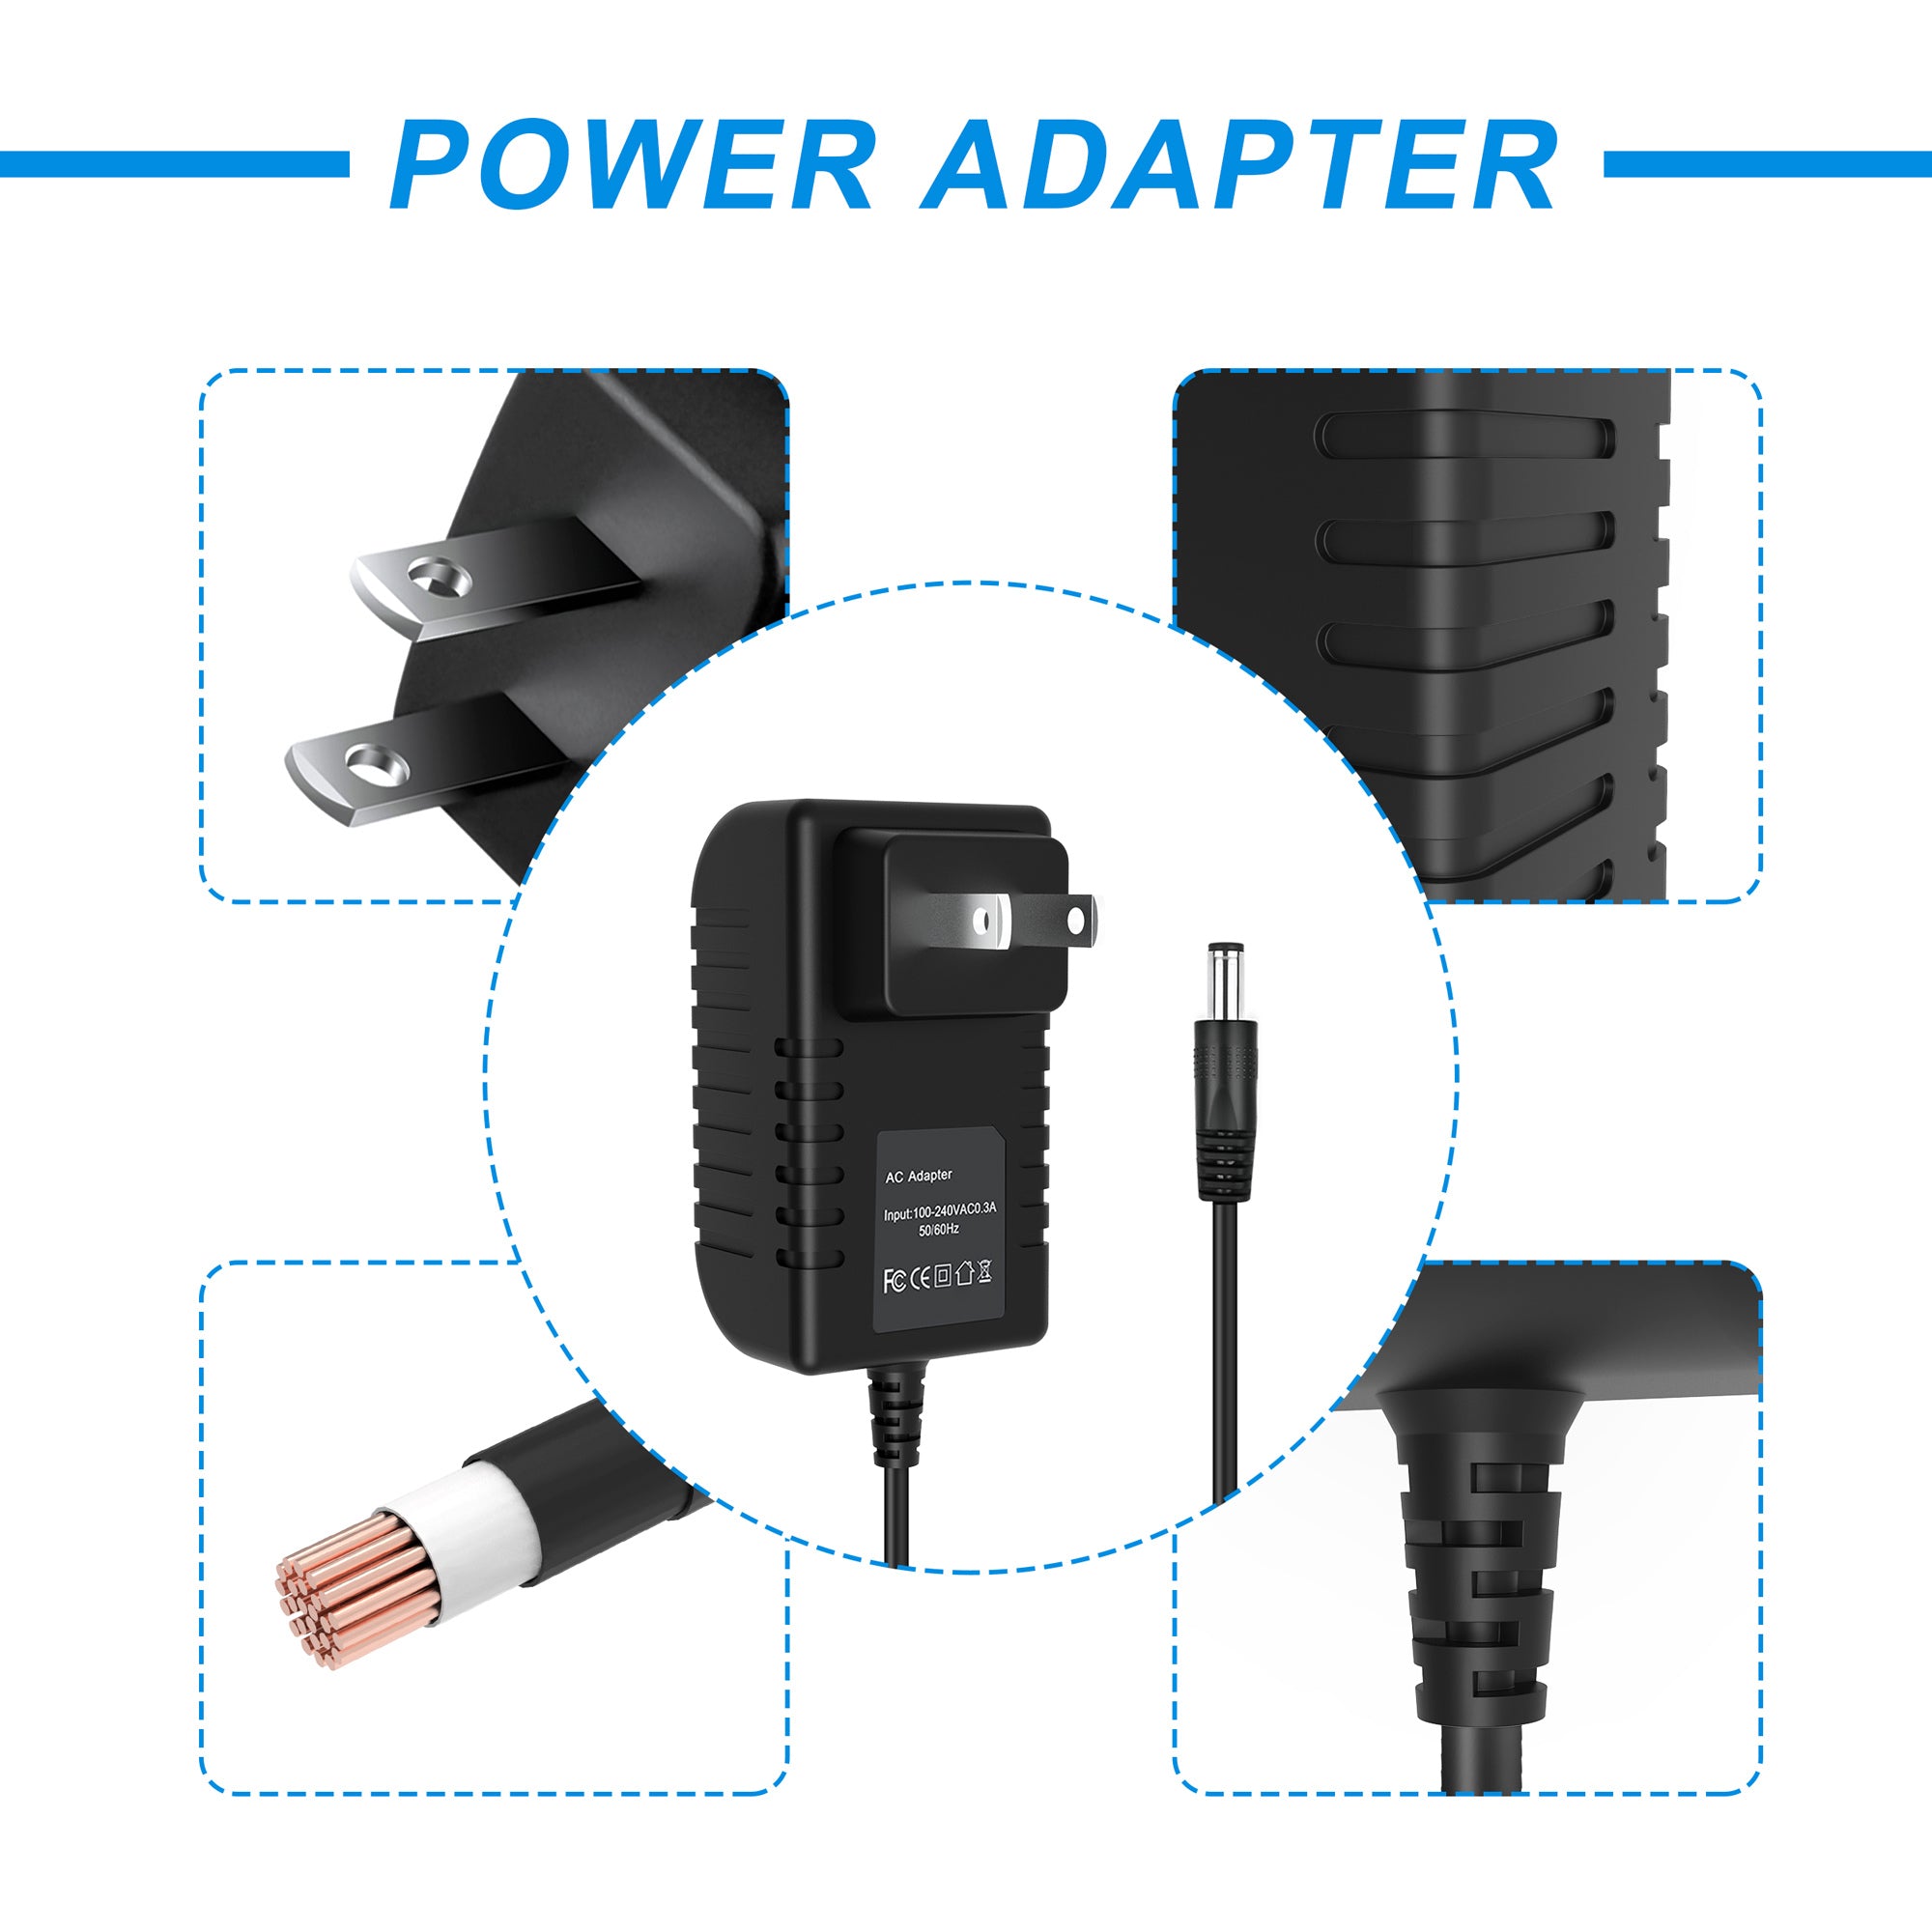 AbleGrid Tablet 5V AC/DC Adapter Compatible with Model SKO2G 0500300U Shenzhen Simsukia5VDC Power Supply Cord Cable PS Wall Home Charger Input: 100 - 240 VAC Worldwide Use Mains PSU